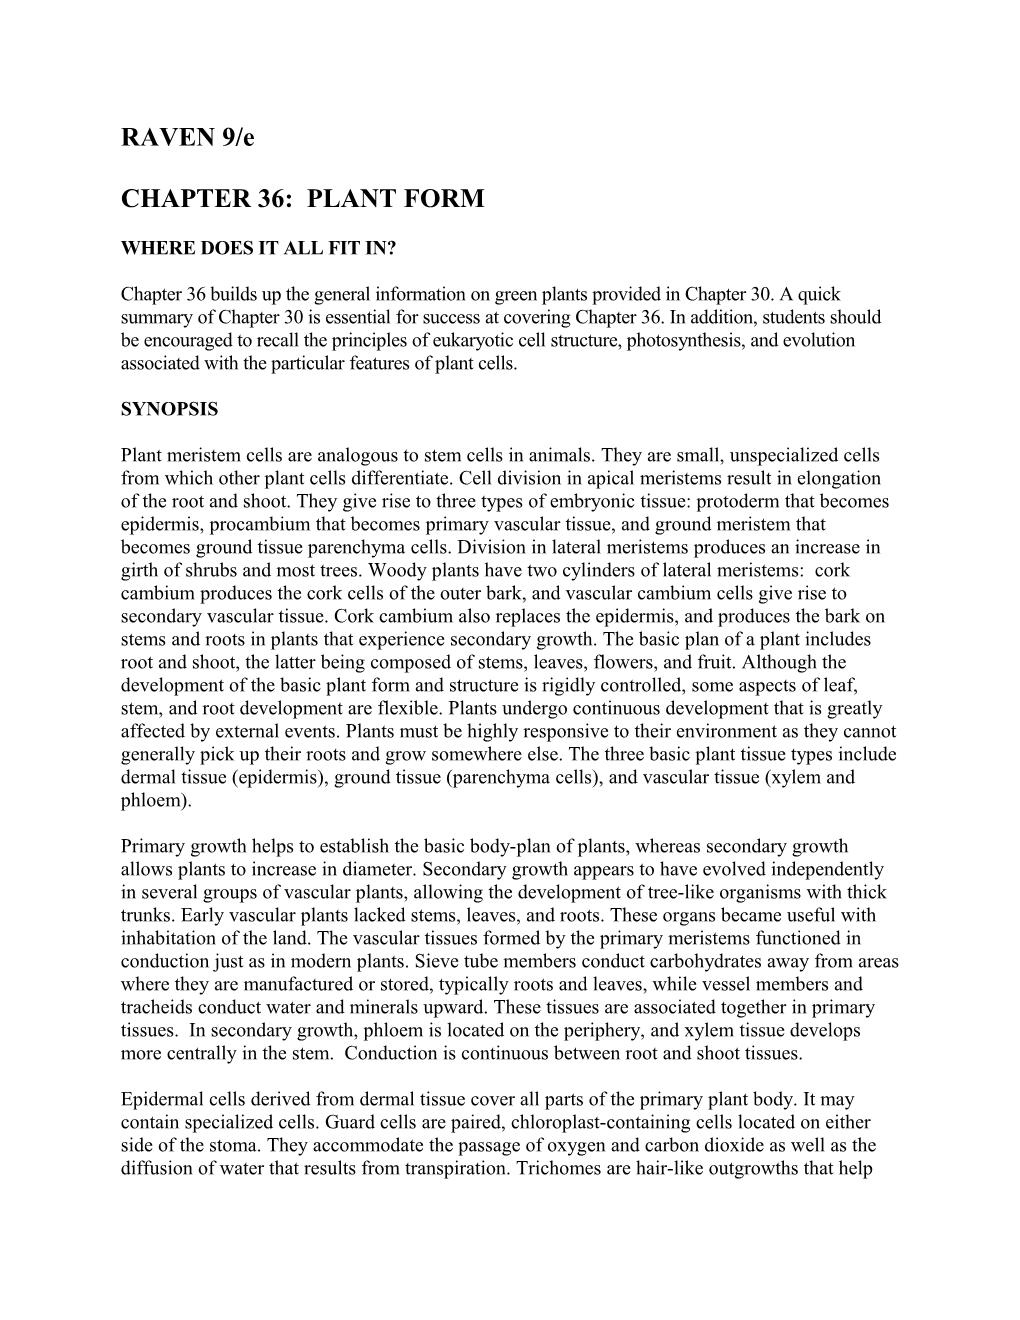 Chapter 38: the Plant Body